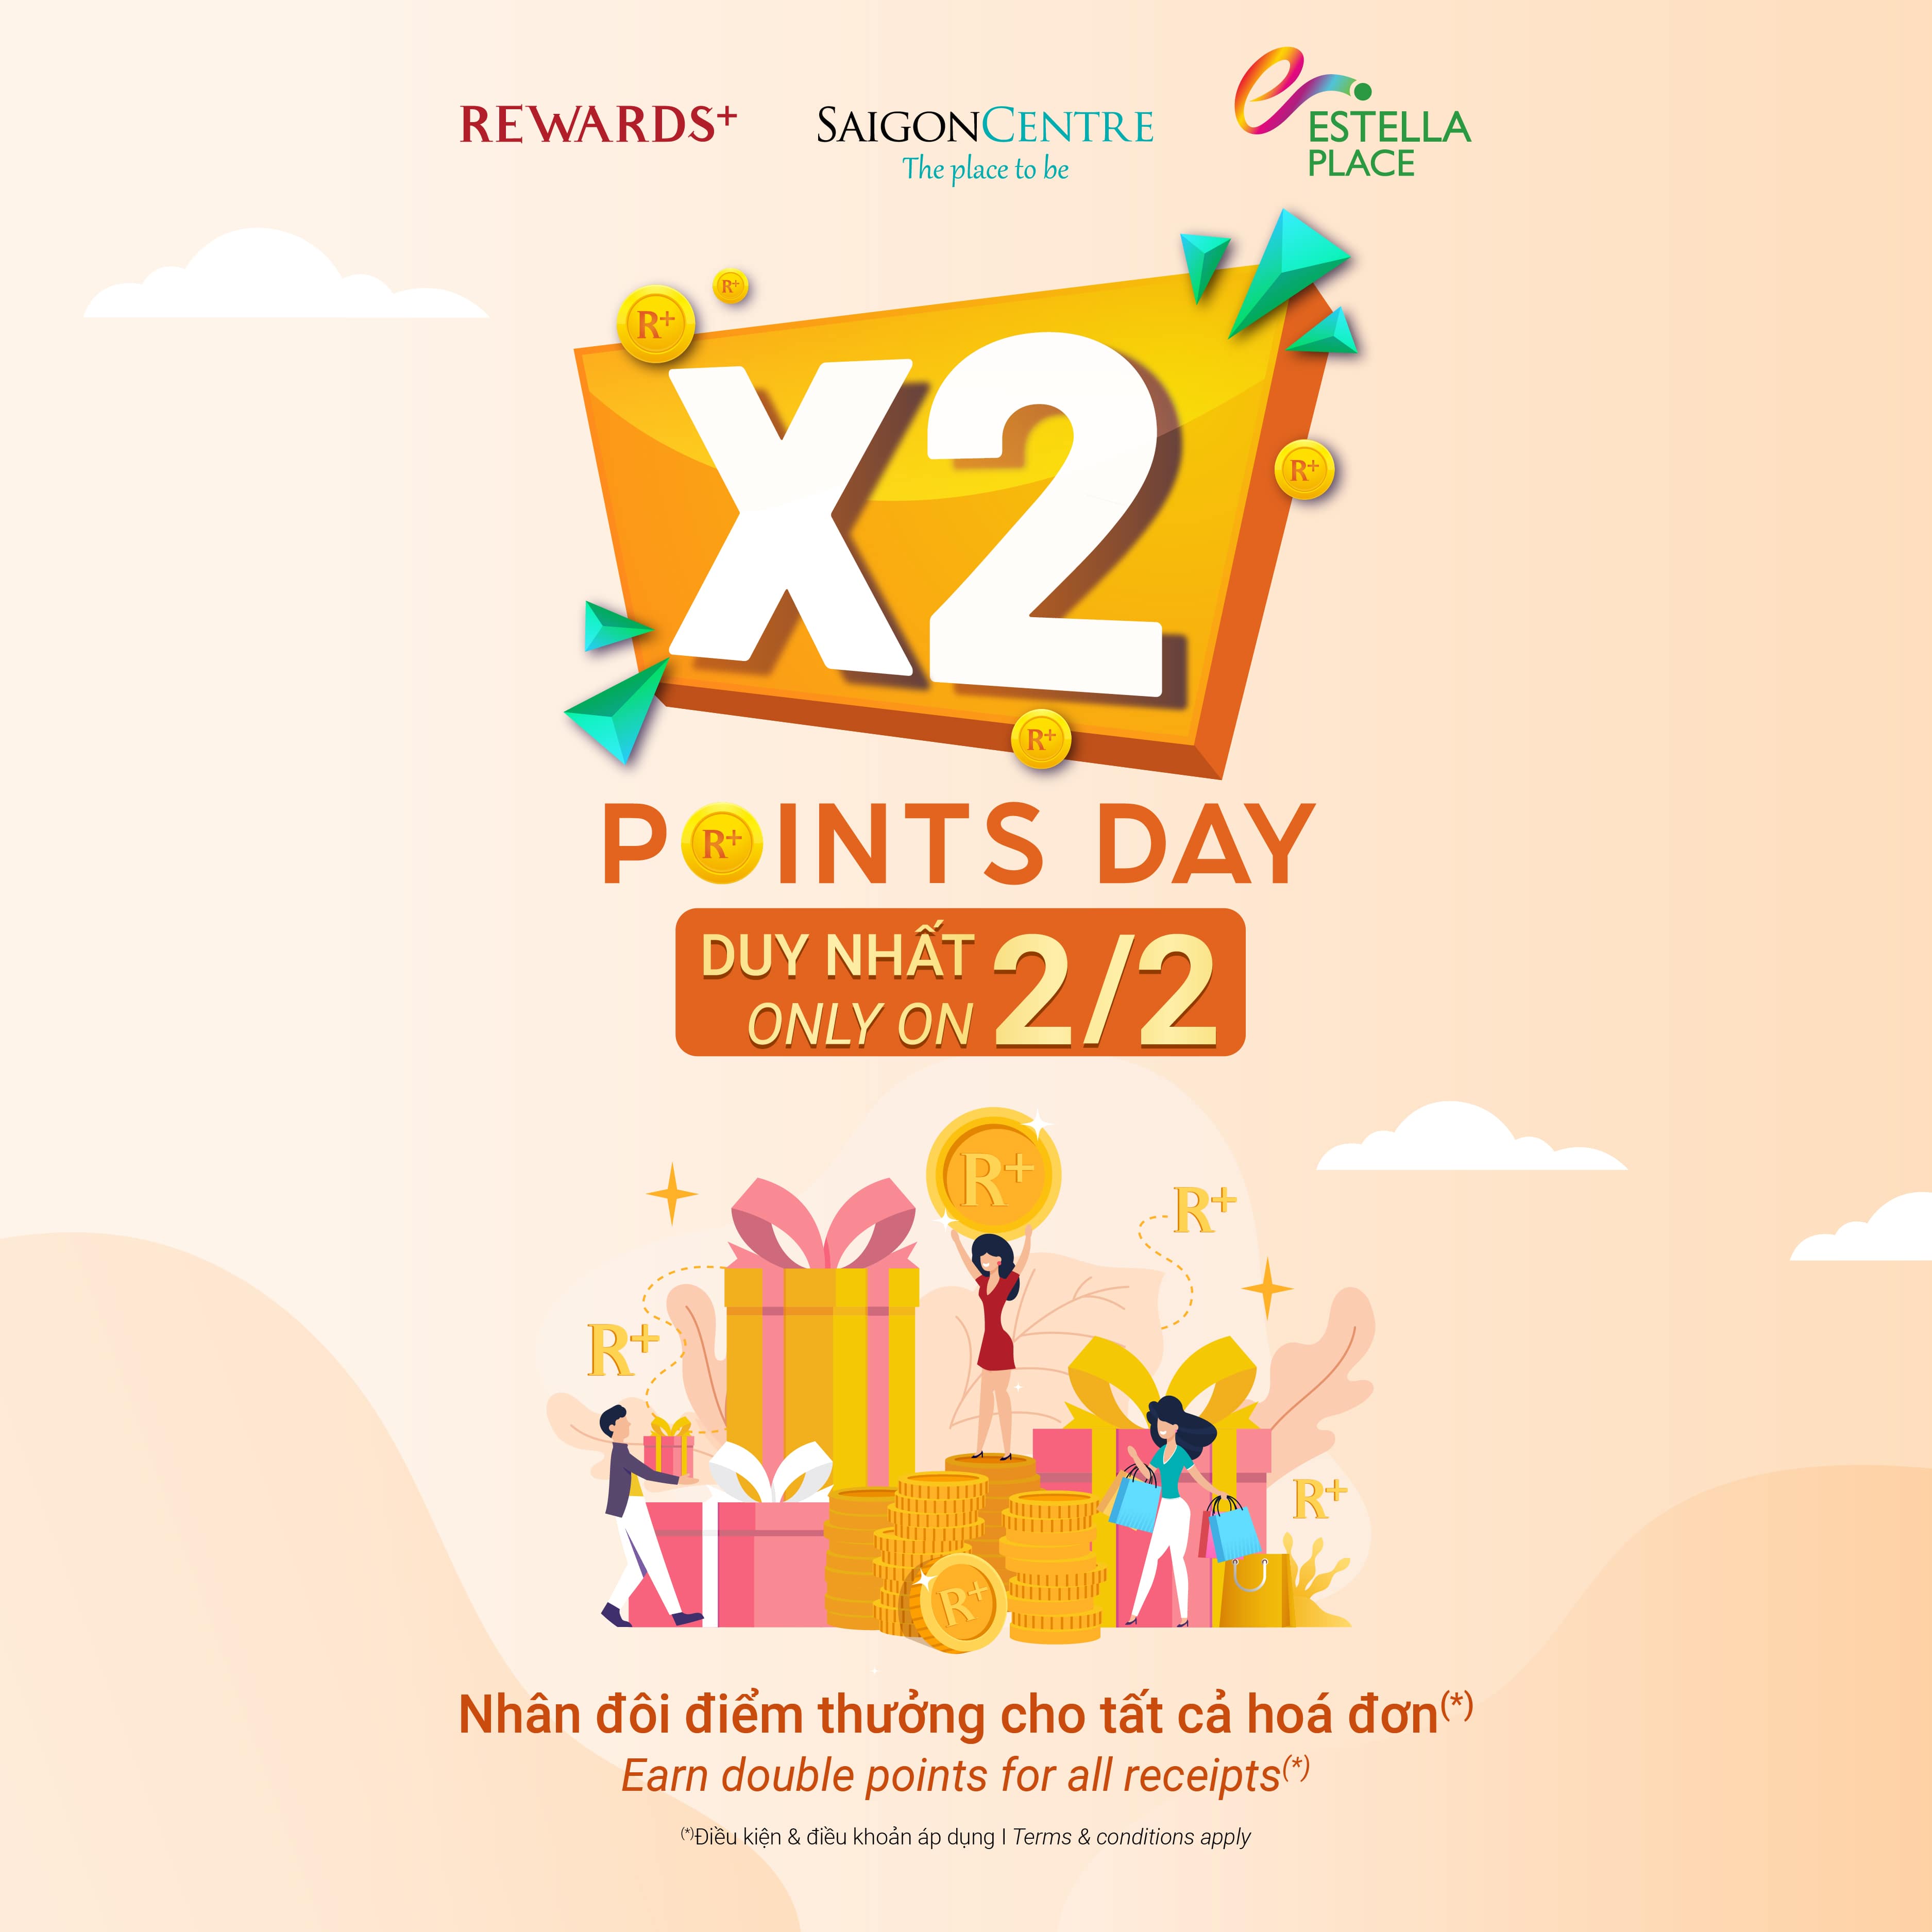 EARN DOUBLE POINTS FOR ALL RECEIPTS ON 02/02